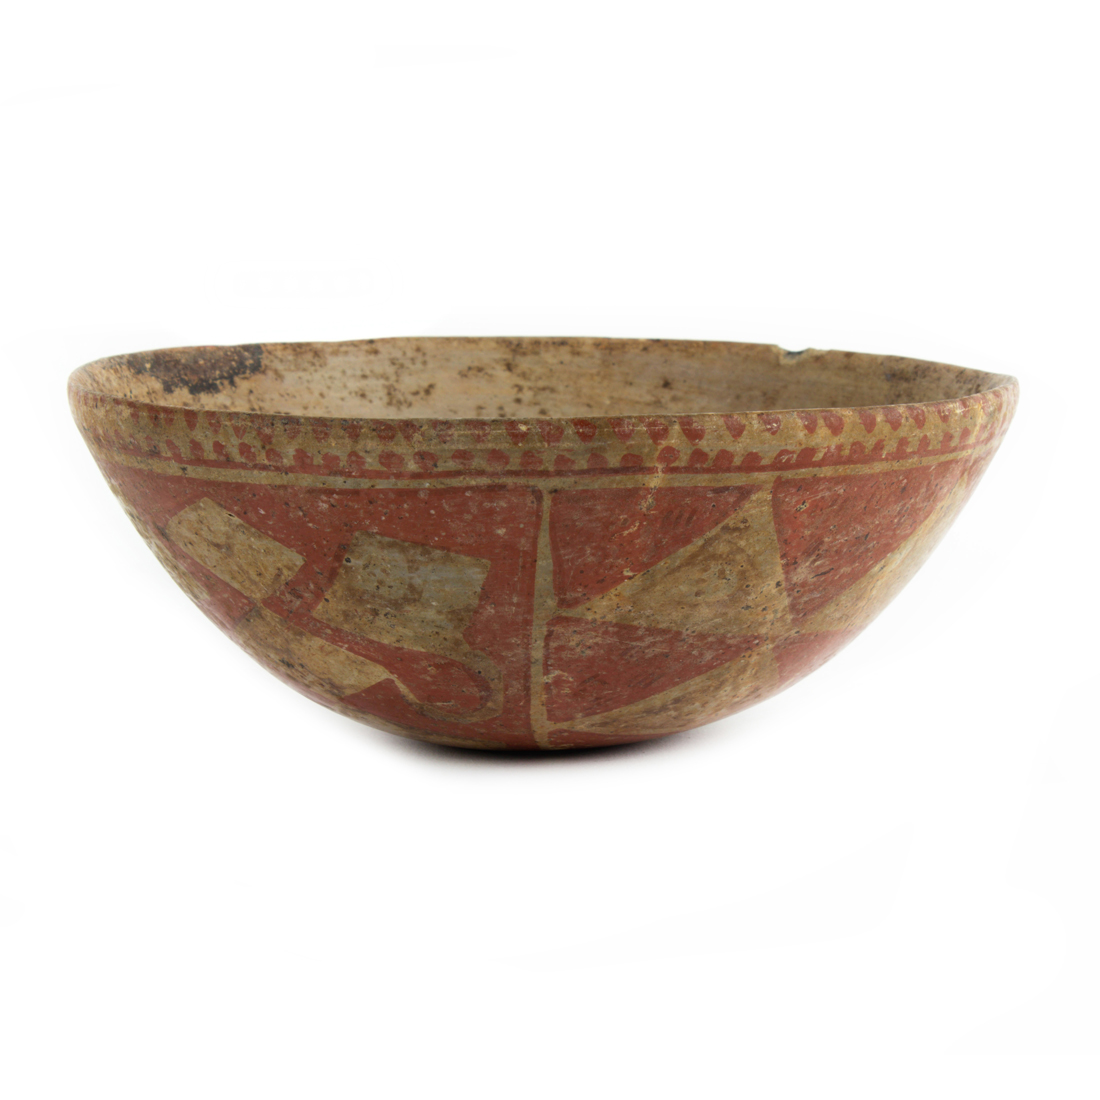 MAYAN RED PAINTED OFFERING BOWL